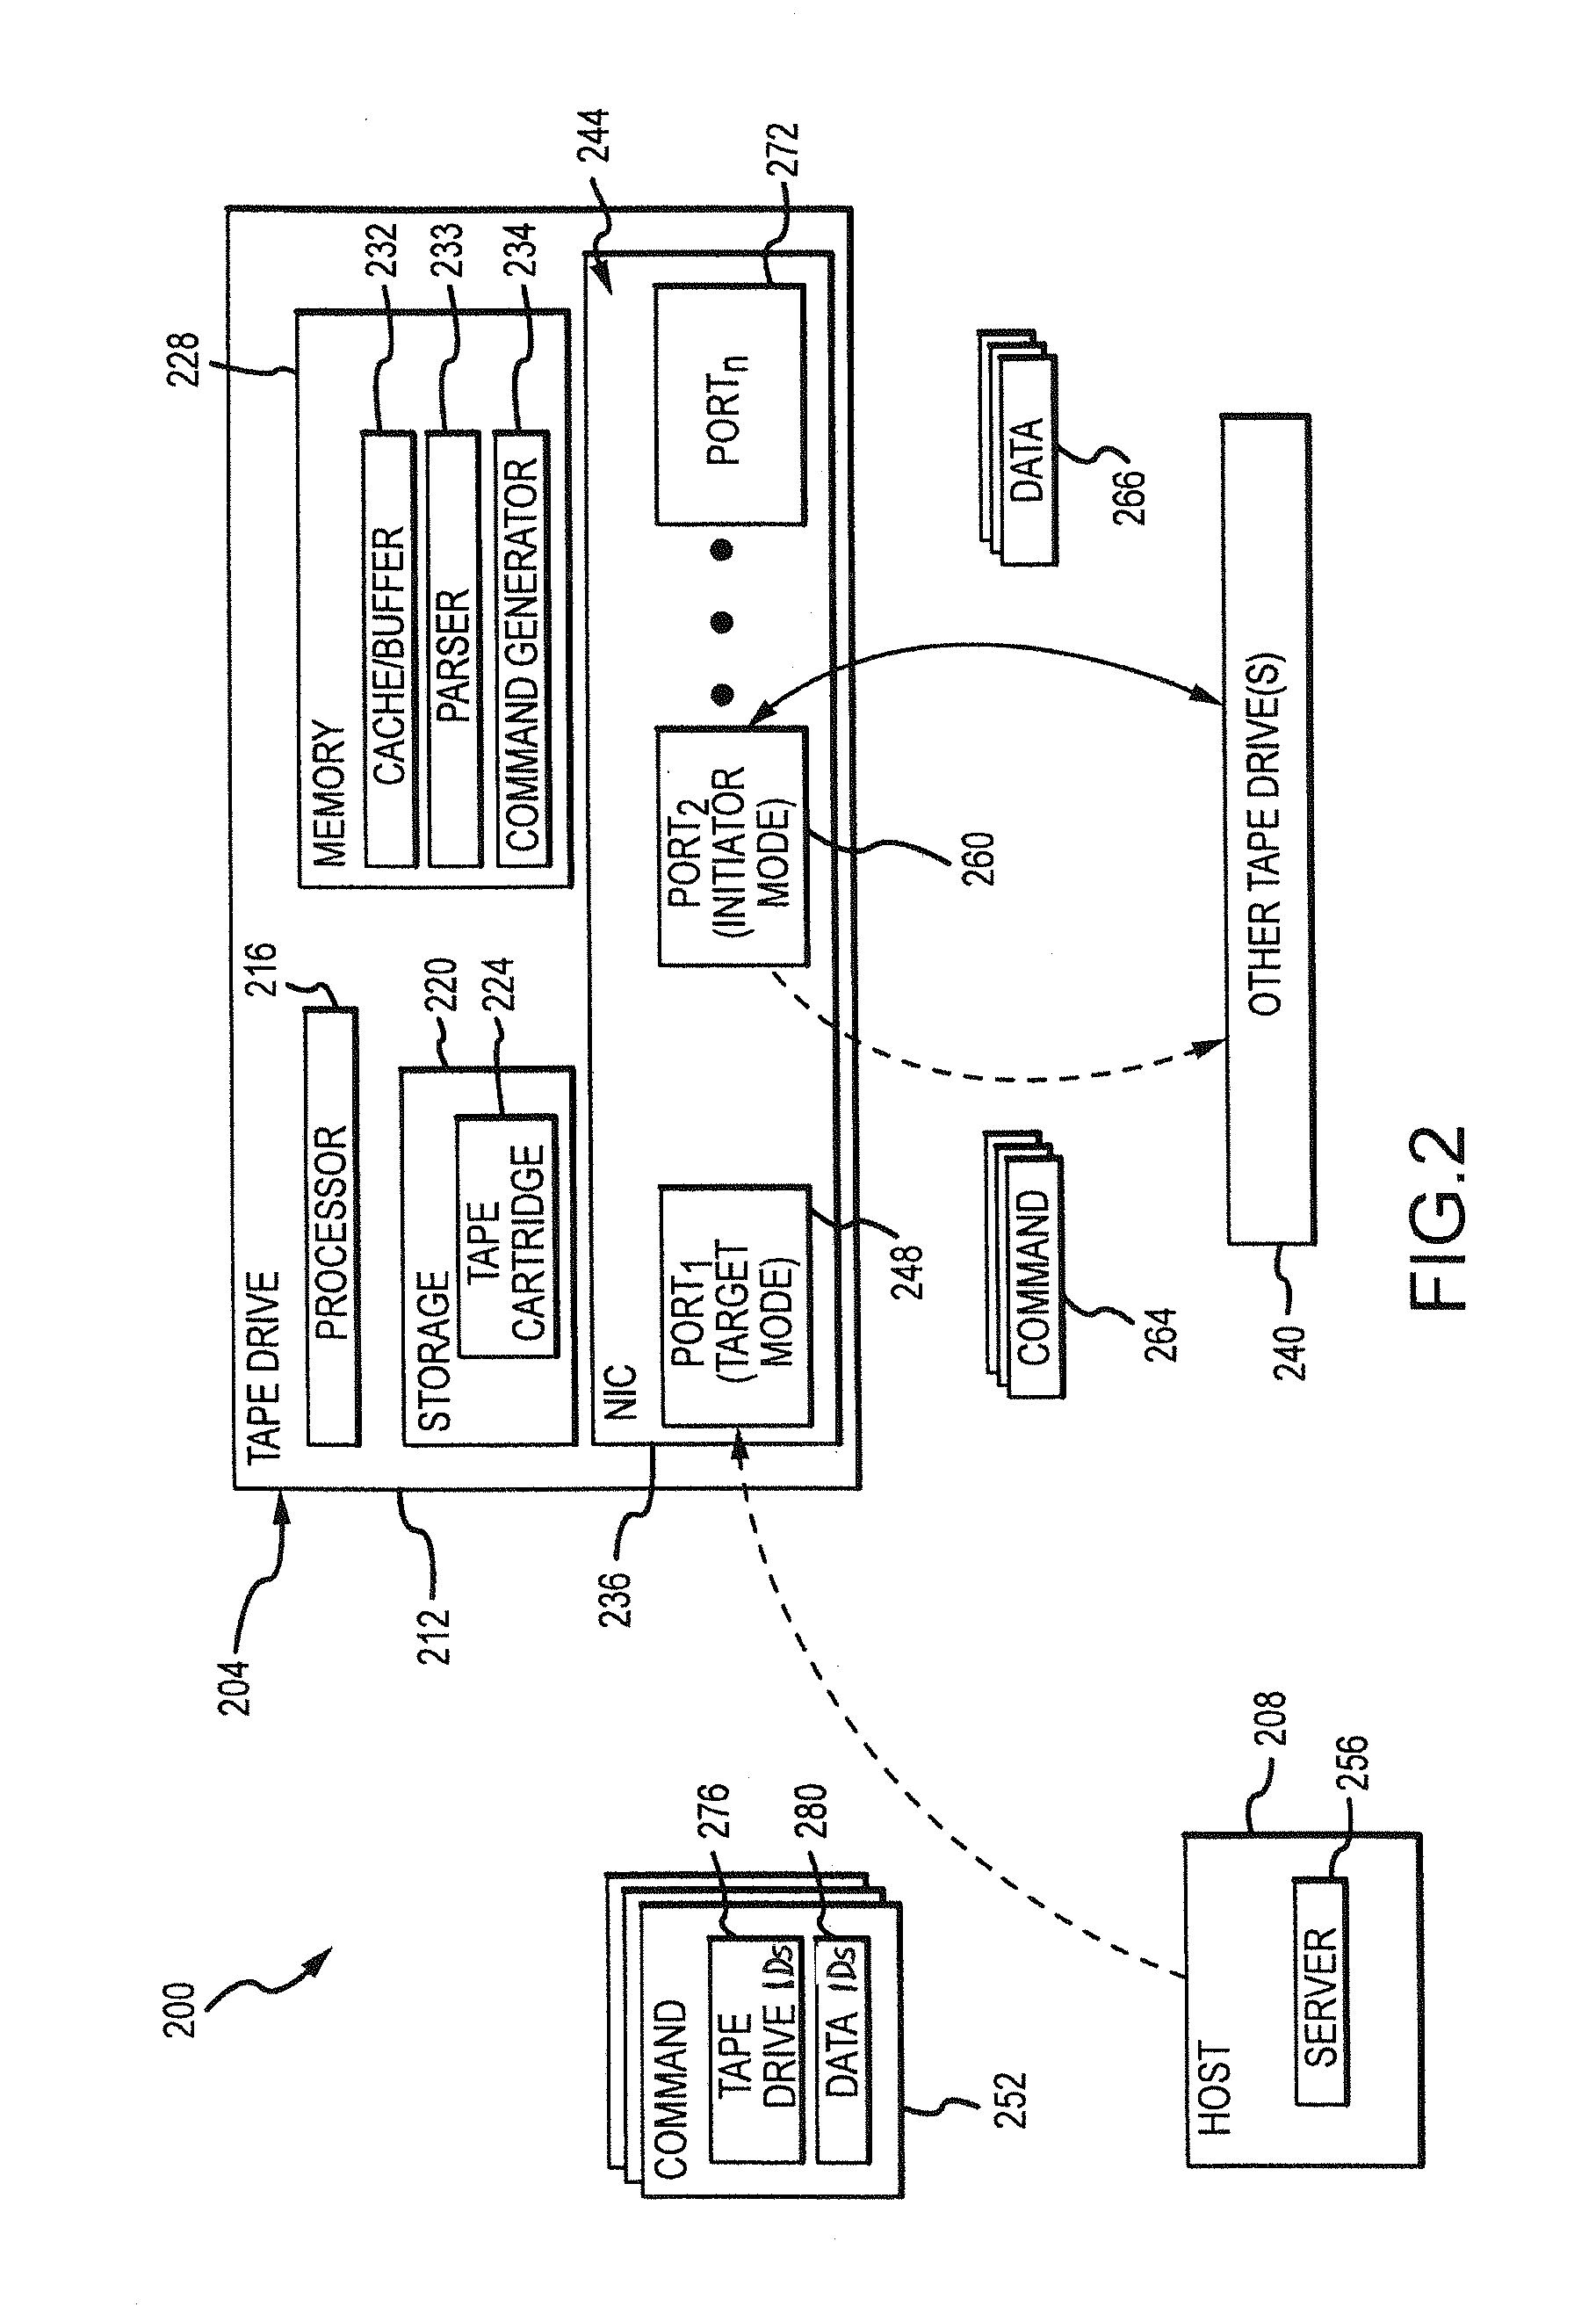 Target and initiator mode configuration of tape drives for data transfer between source and destination tape drives